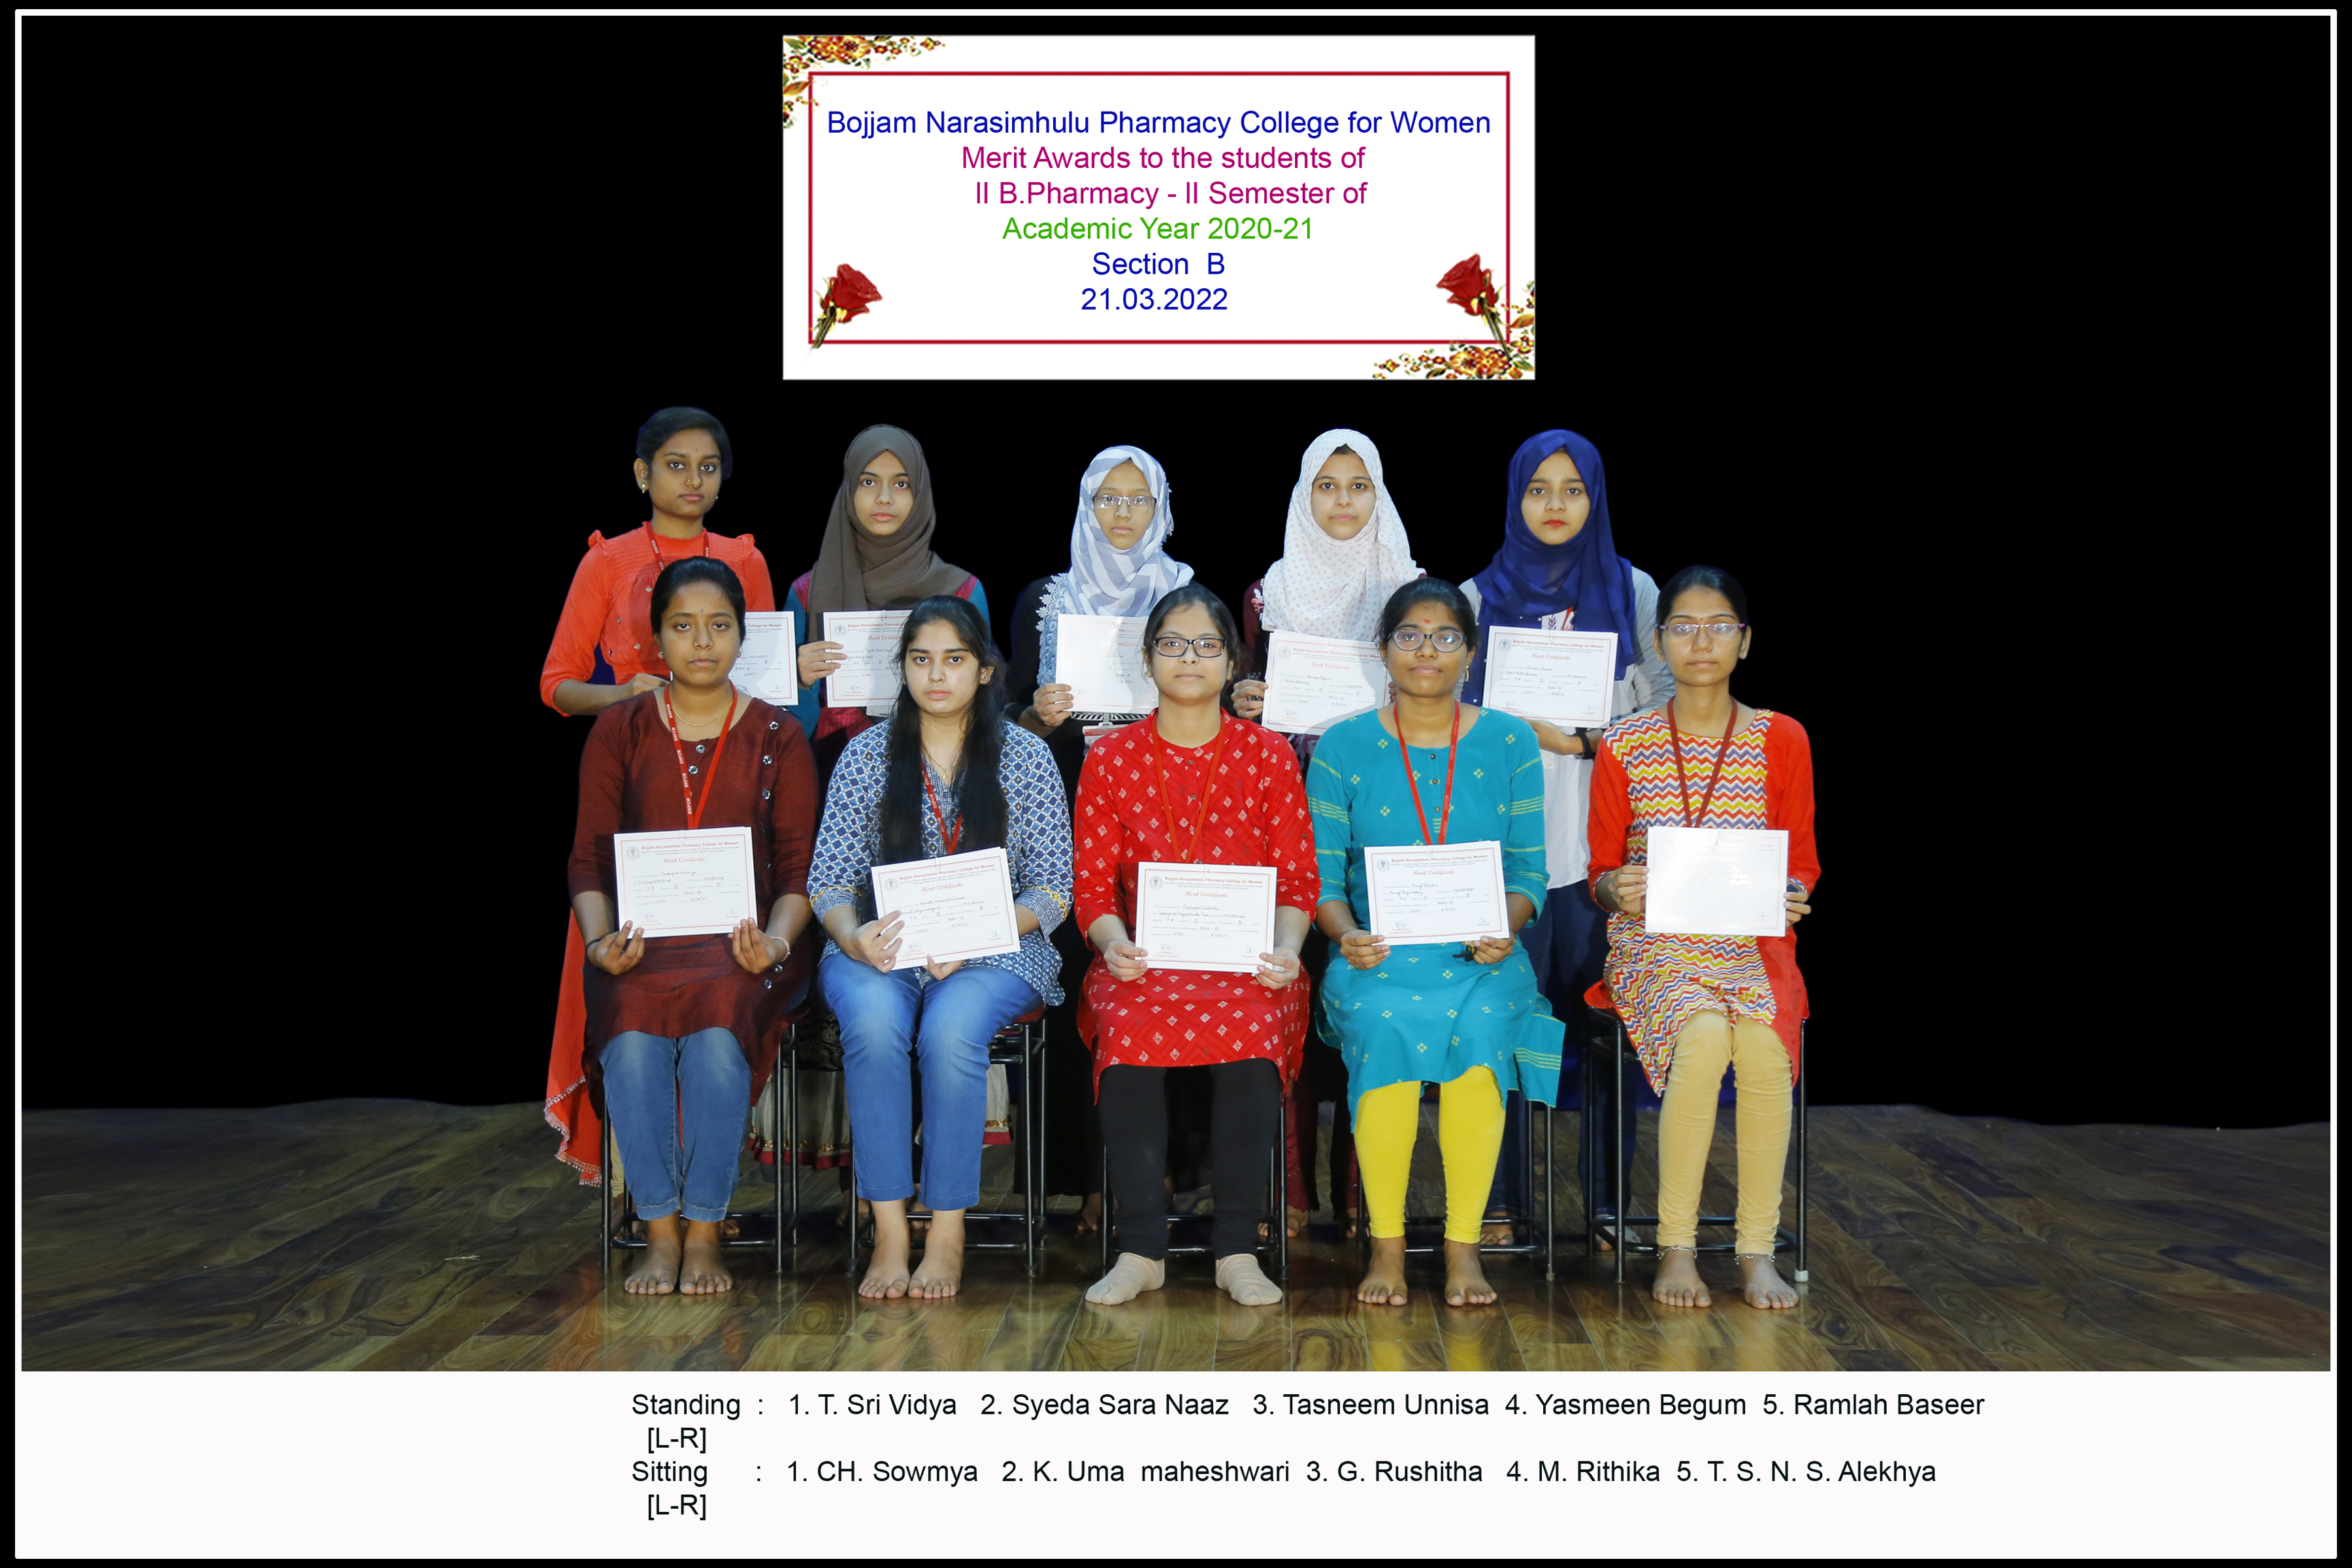 Merit awards to the students of II year II Semester for the Academic year 2020-21